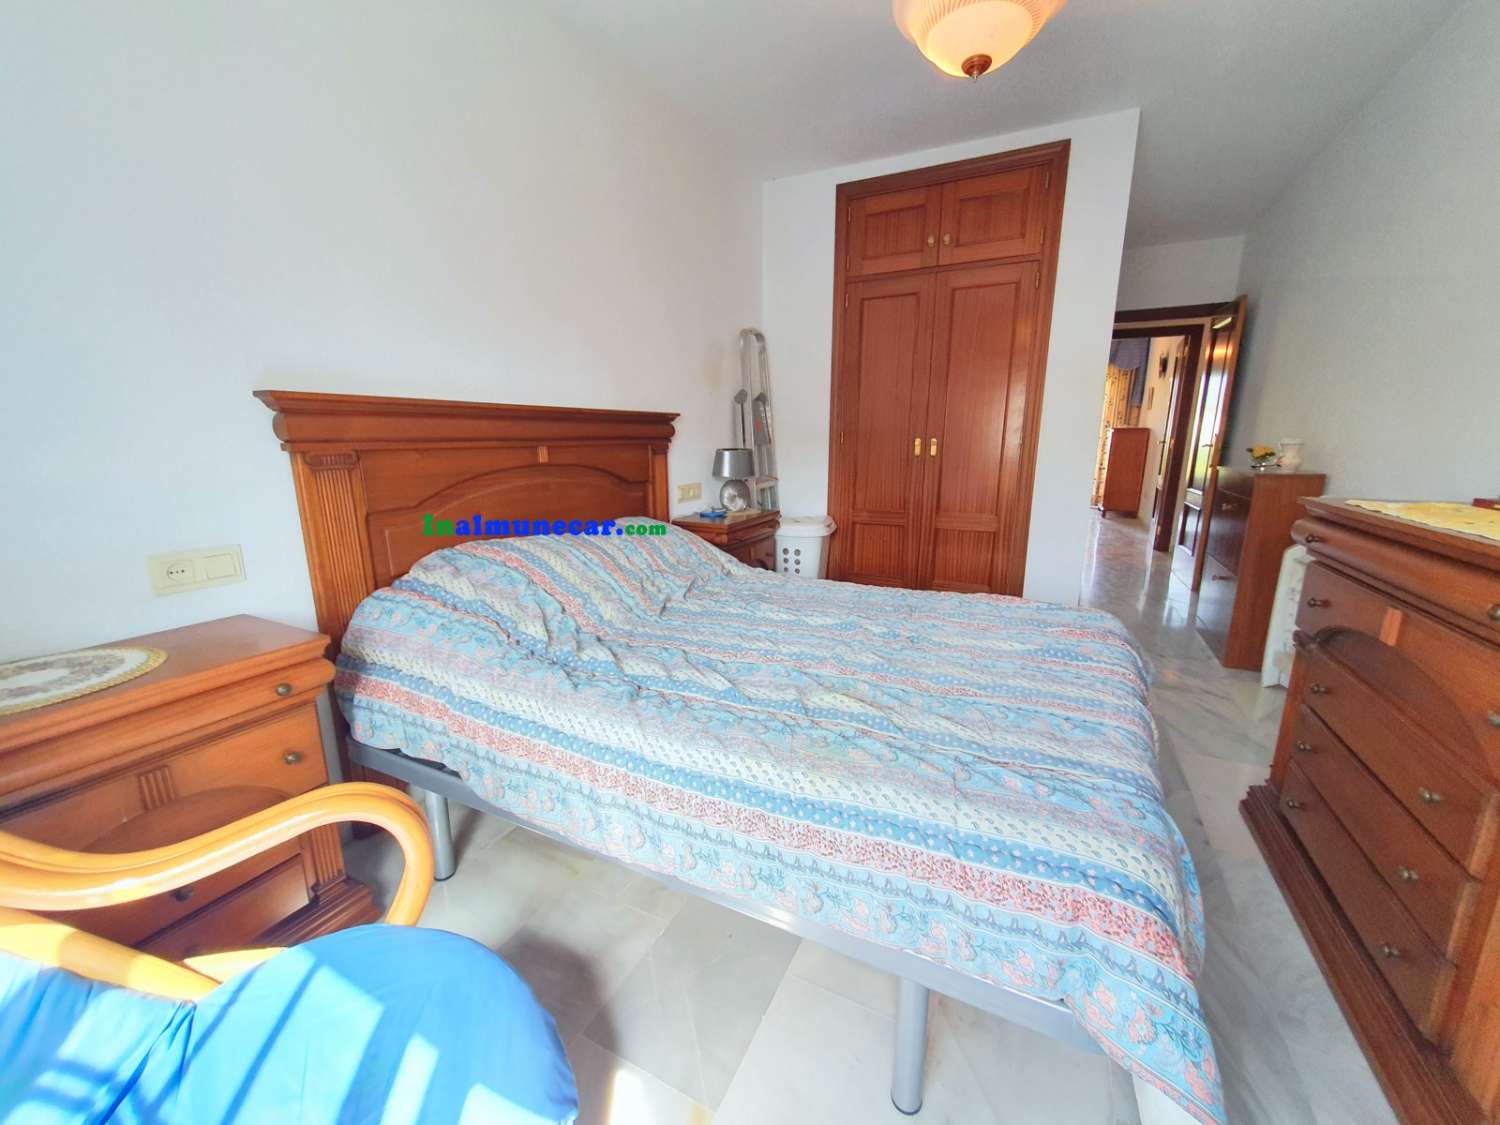 Apartment for sale in Almuñécar with parking space and storage room